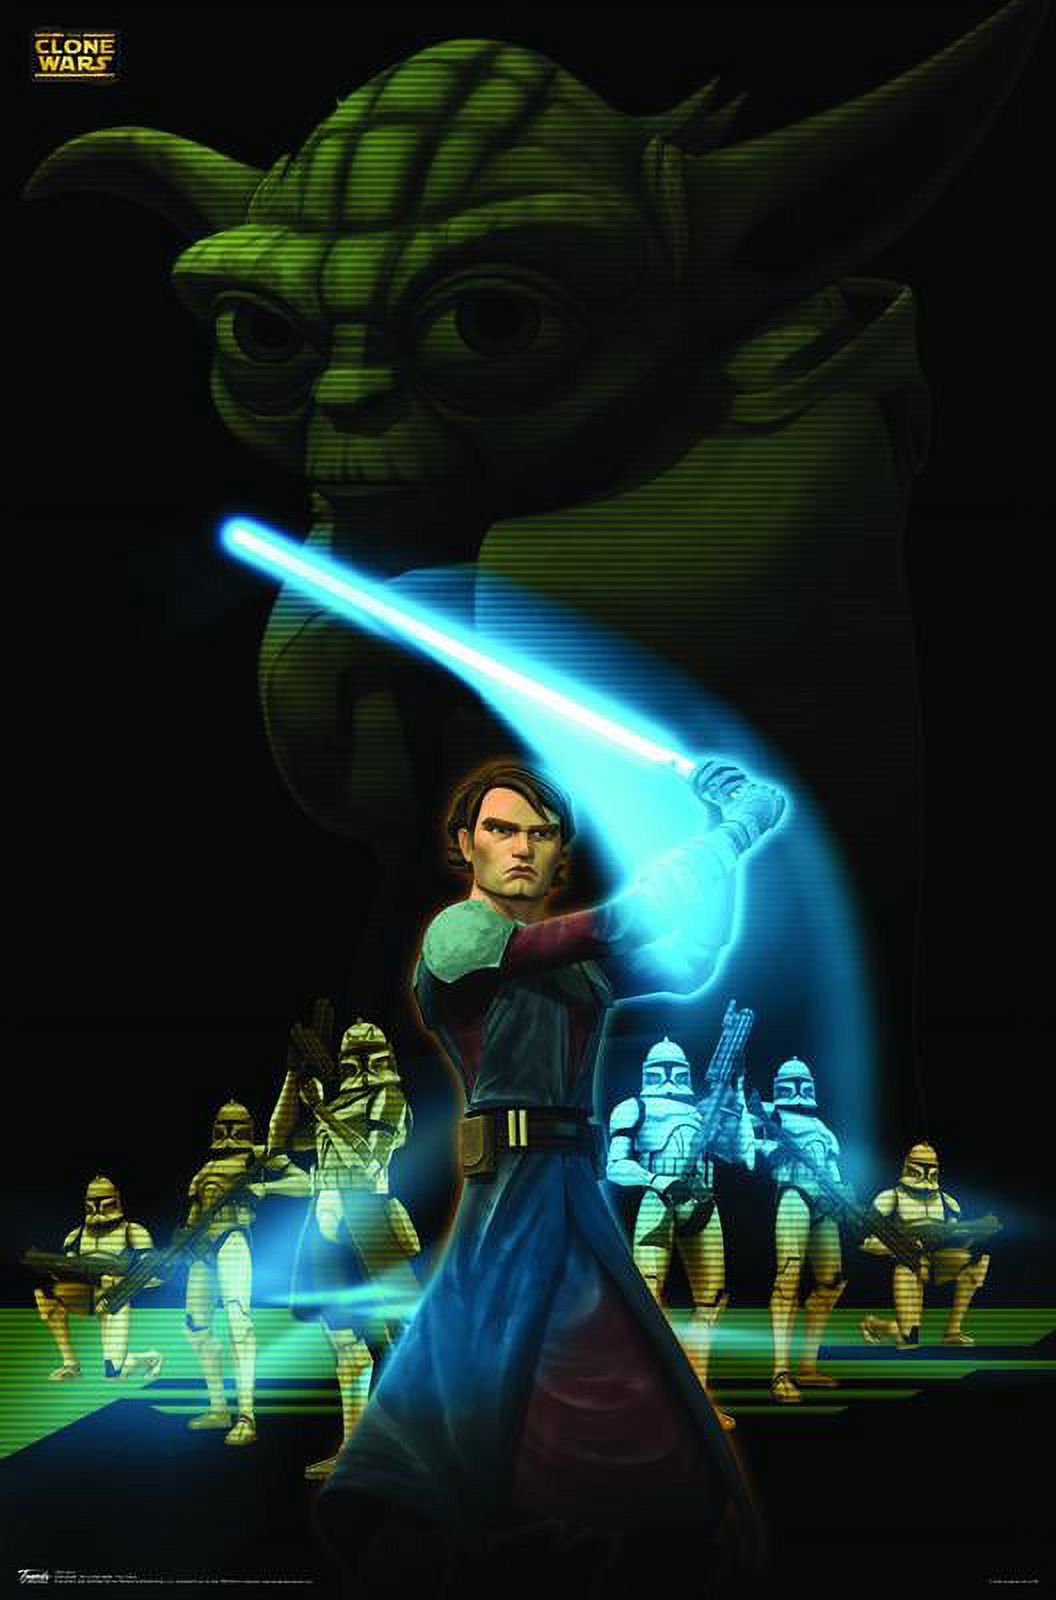 Trends International Star Wars: The Clone Wars - The Force Poster - image 1 of 2